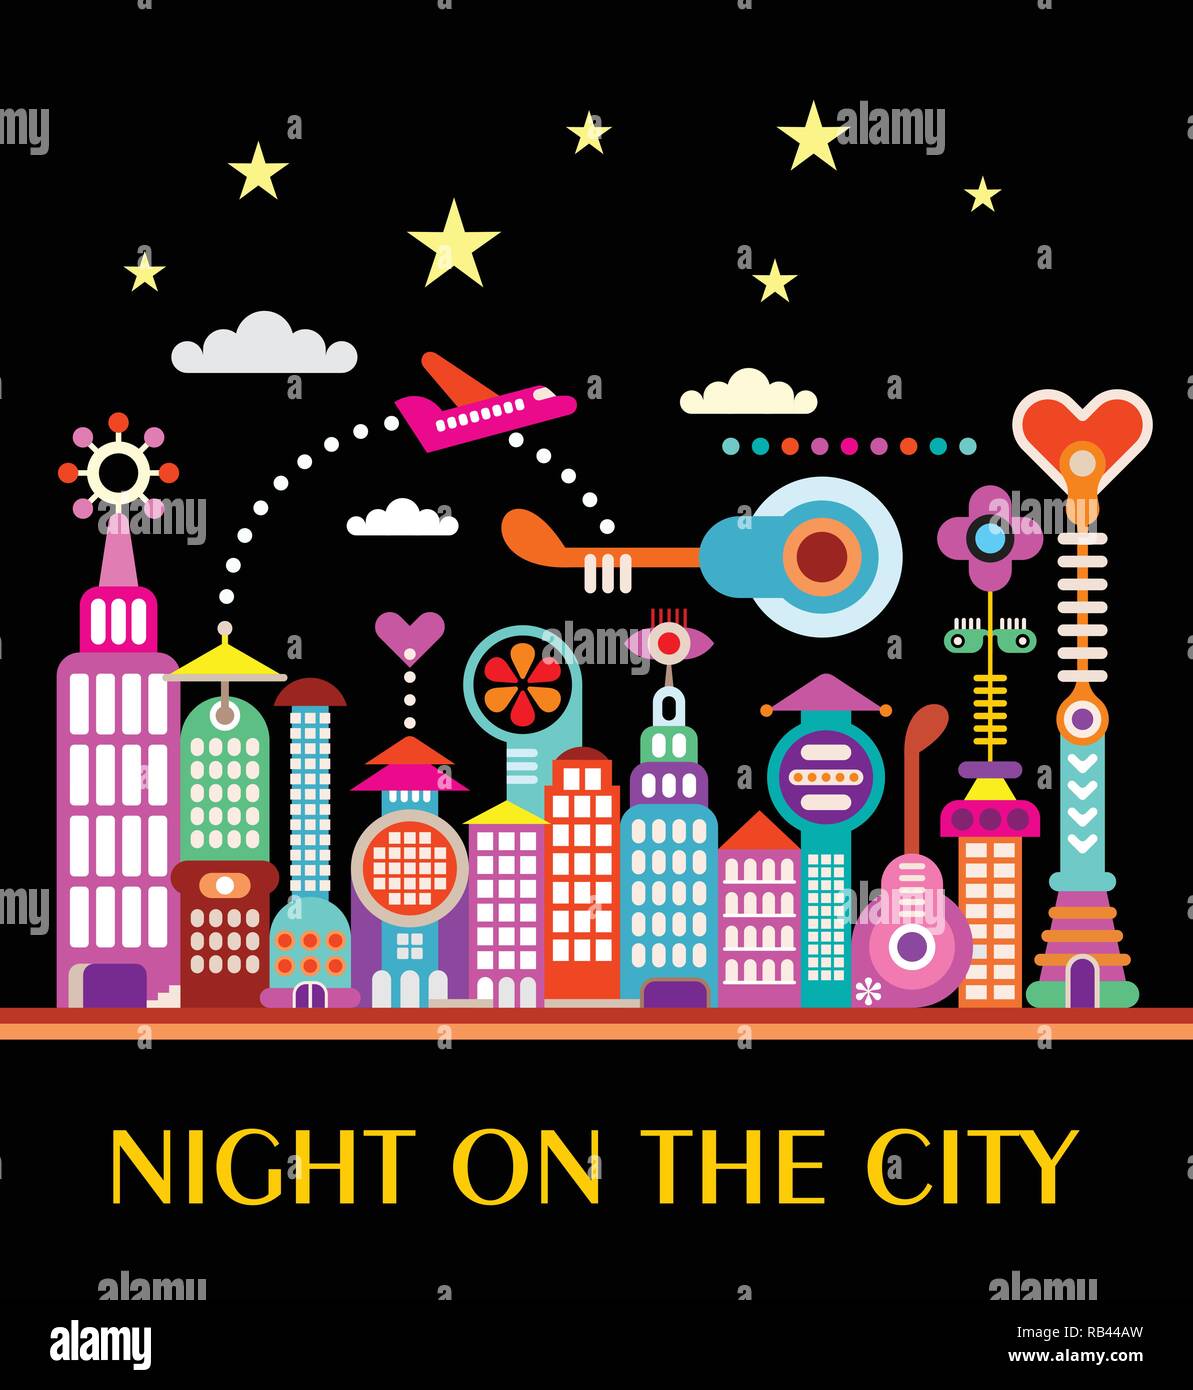 Vibrant colors on a black background Future City vector illustration. Various modern buildings and Night on the City text. Stock Vector